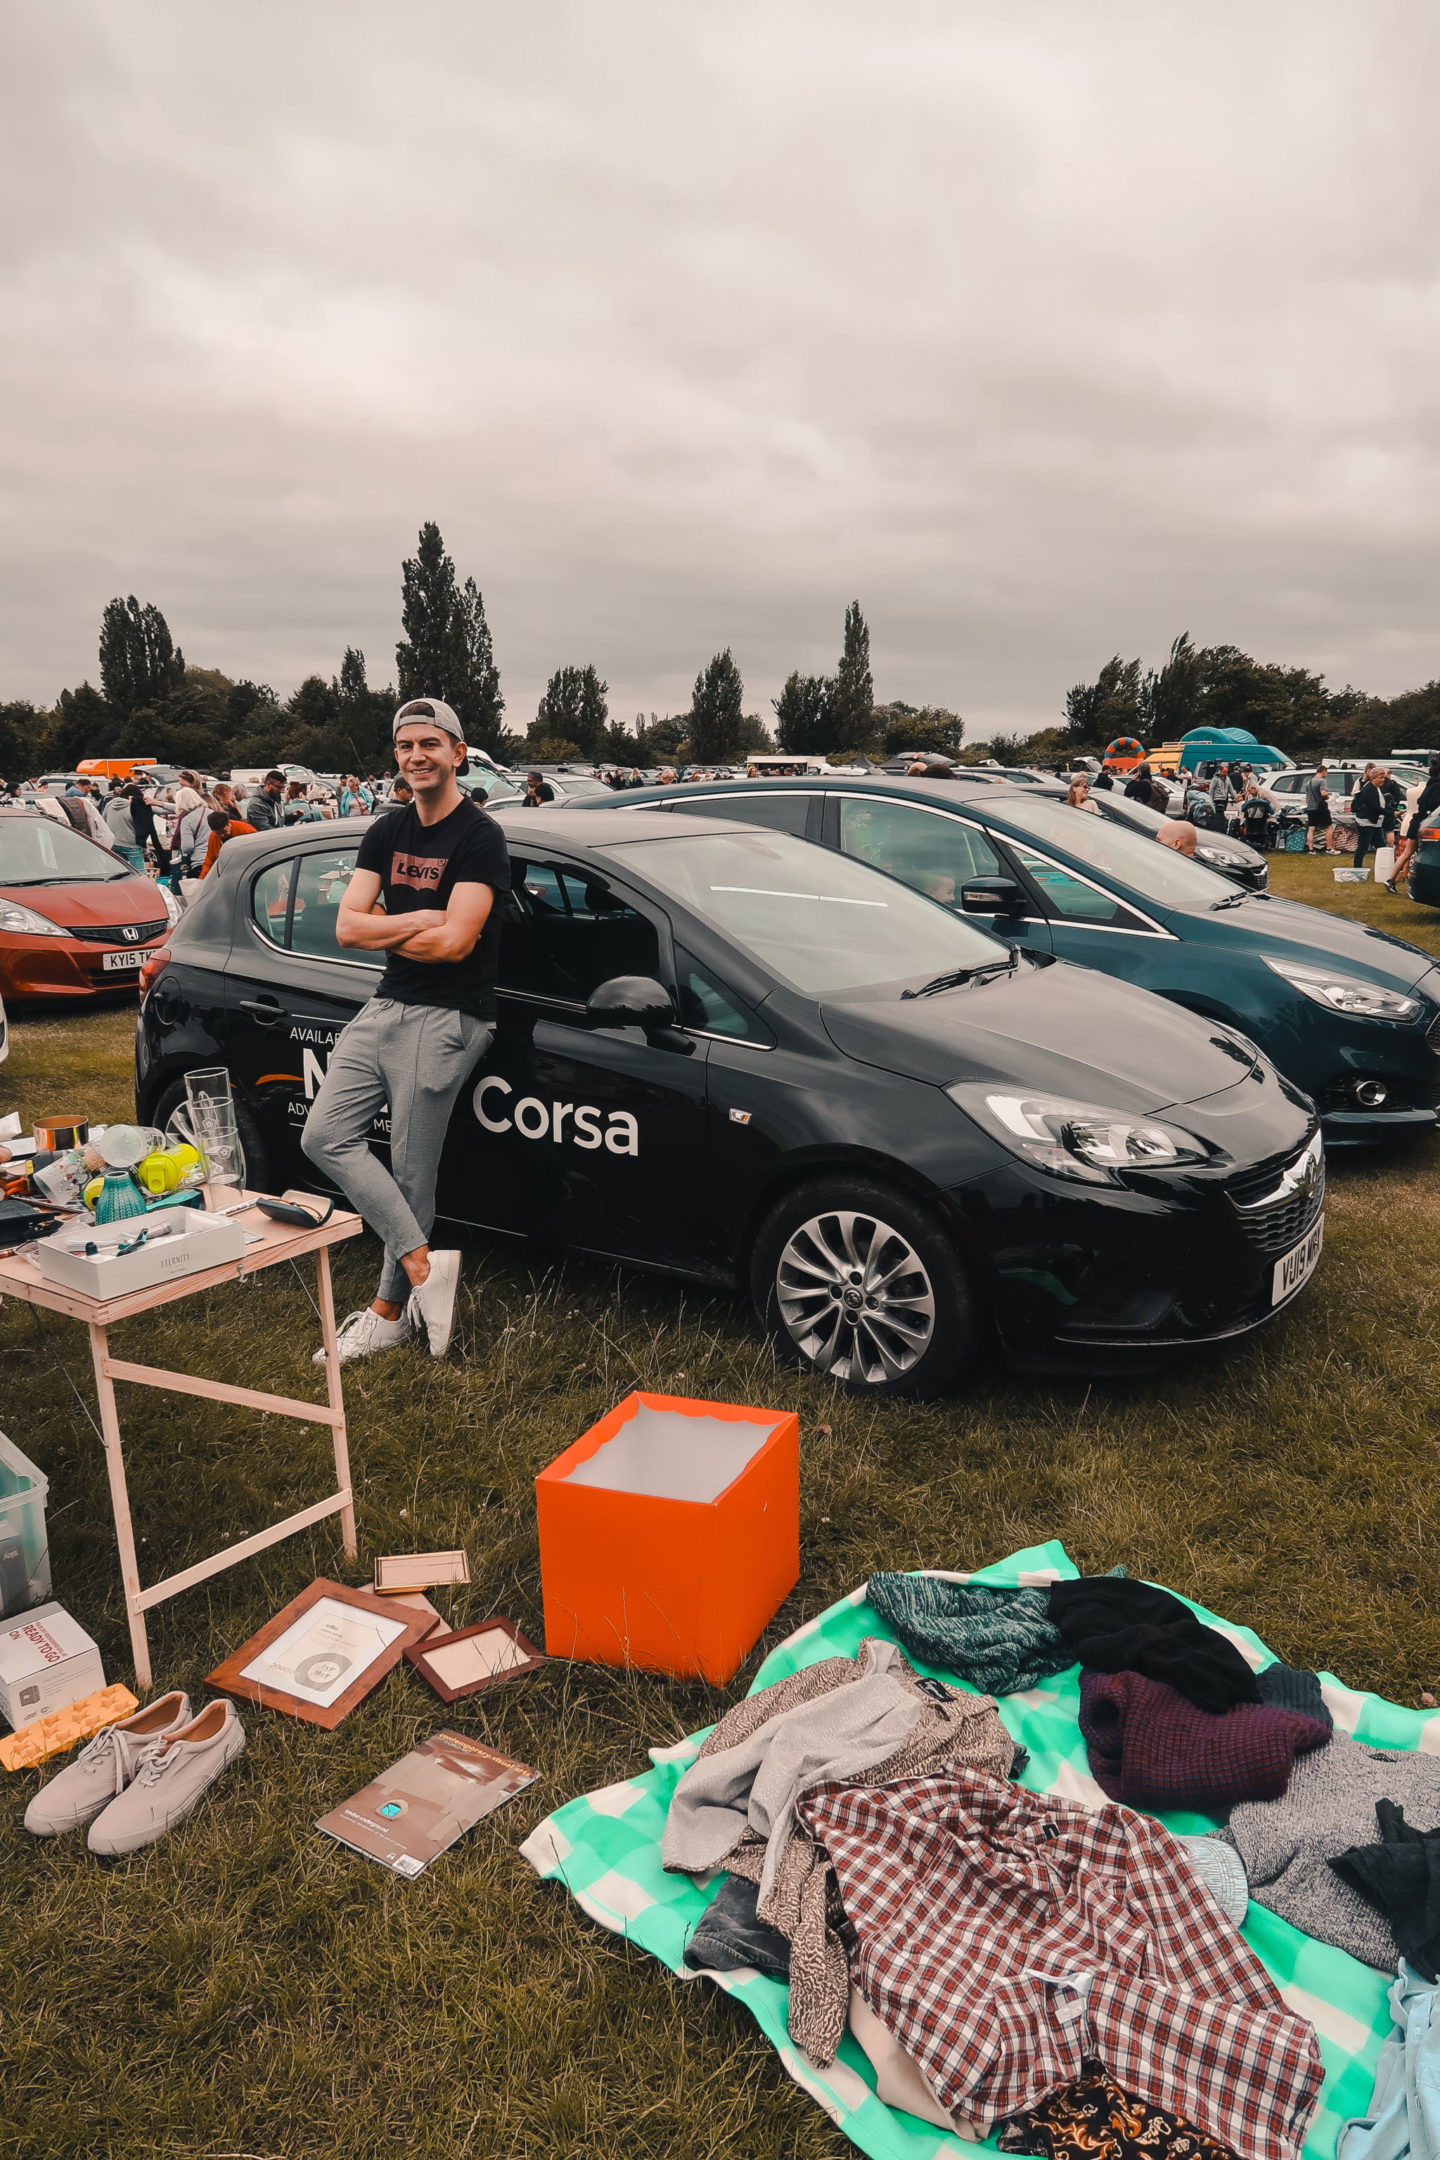 SELLING AT A CAR BOOT SALE – TIPS & TRICKS